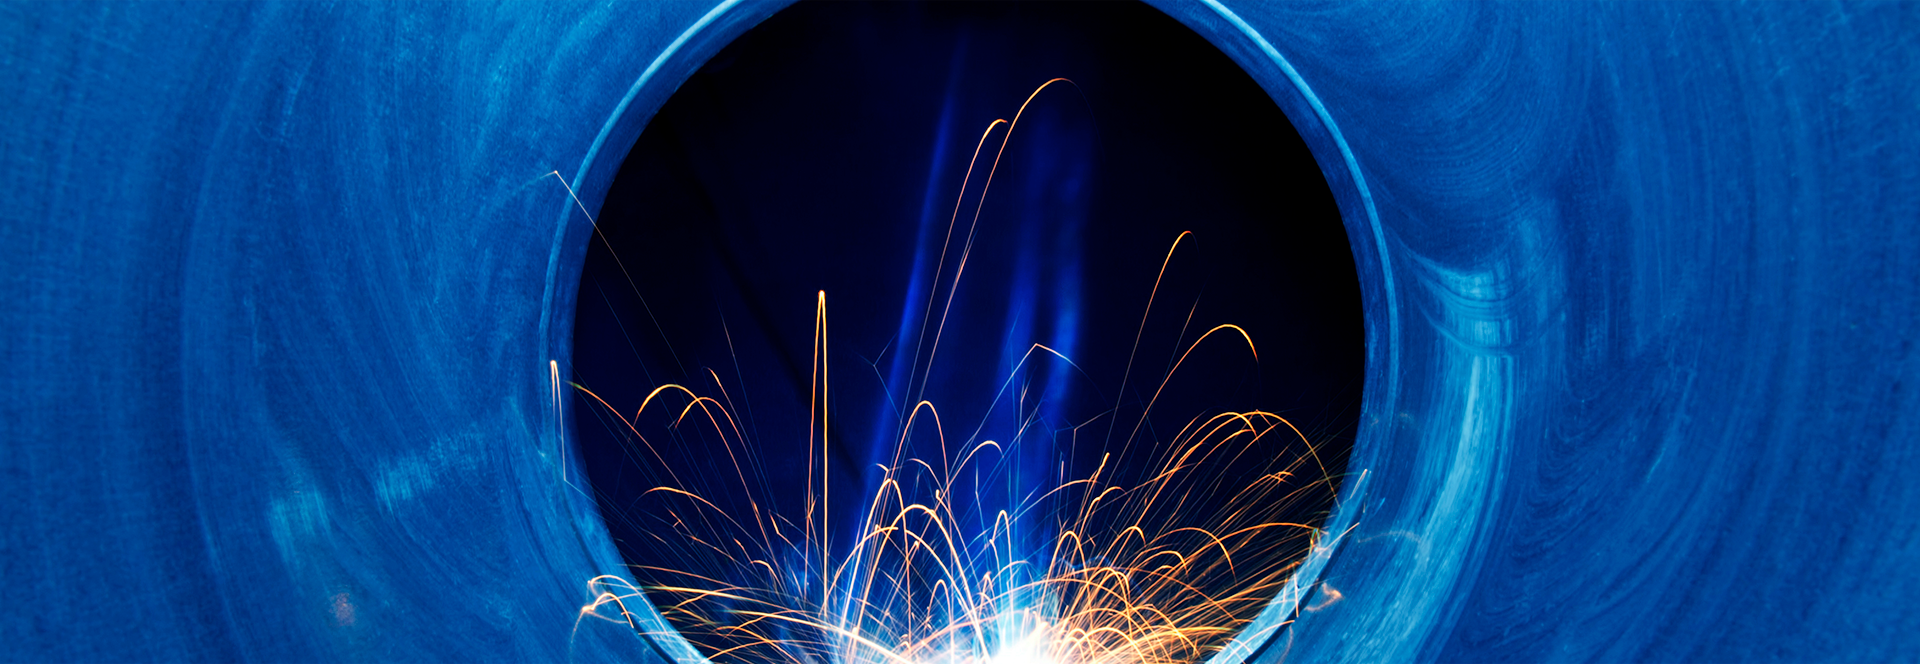 Sparks from a welder reflect off circular steel